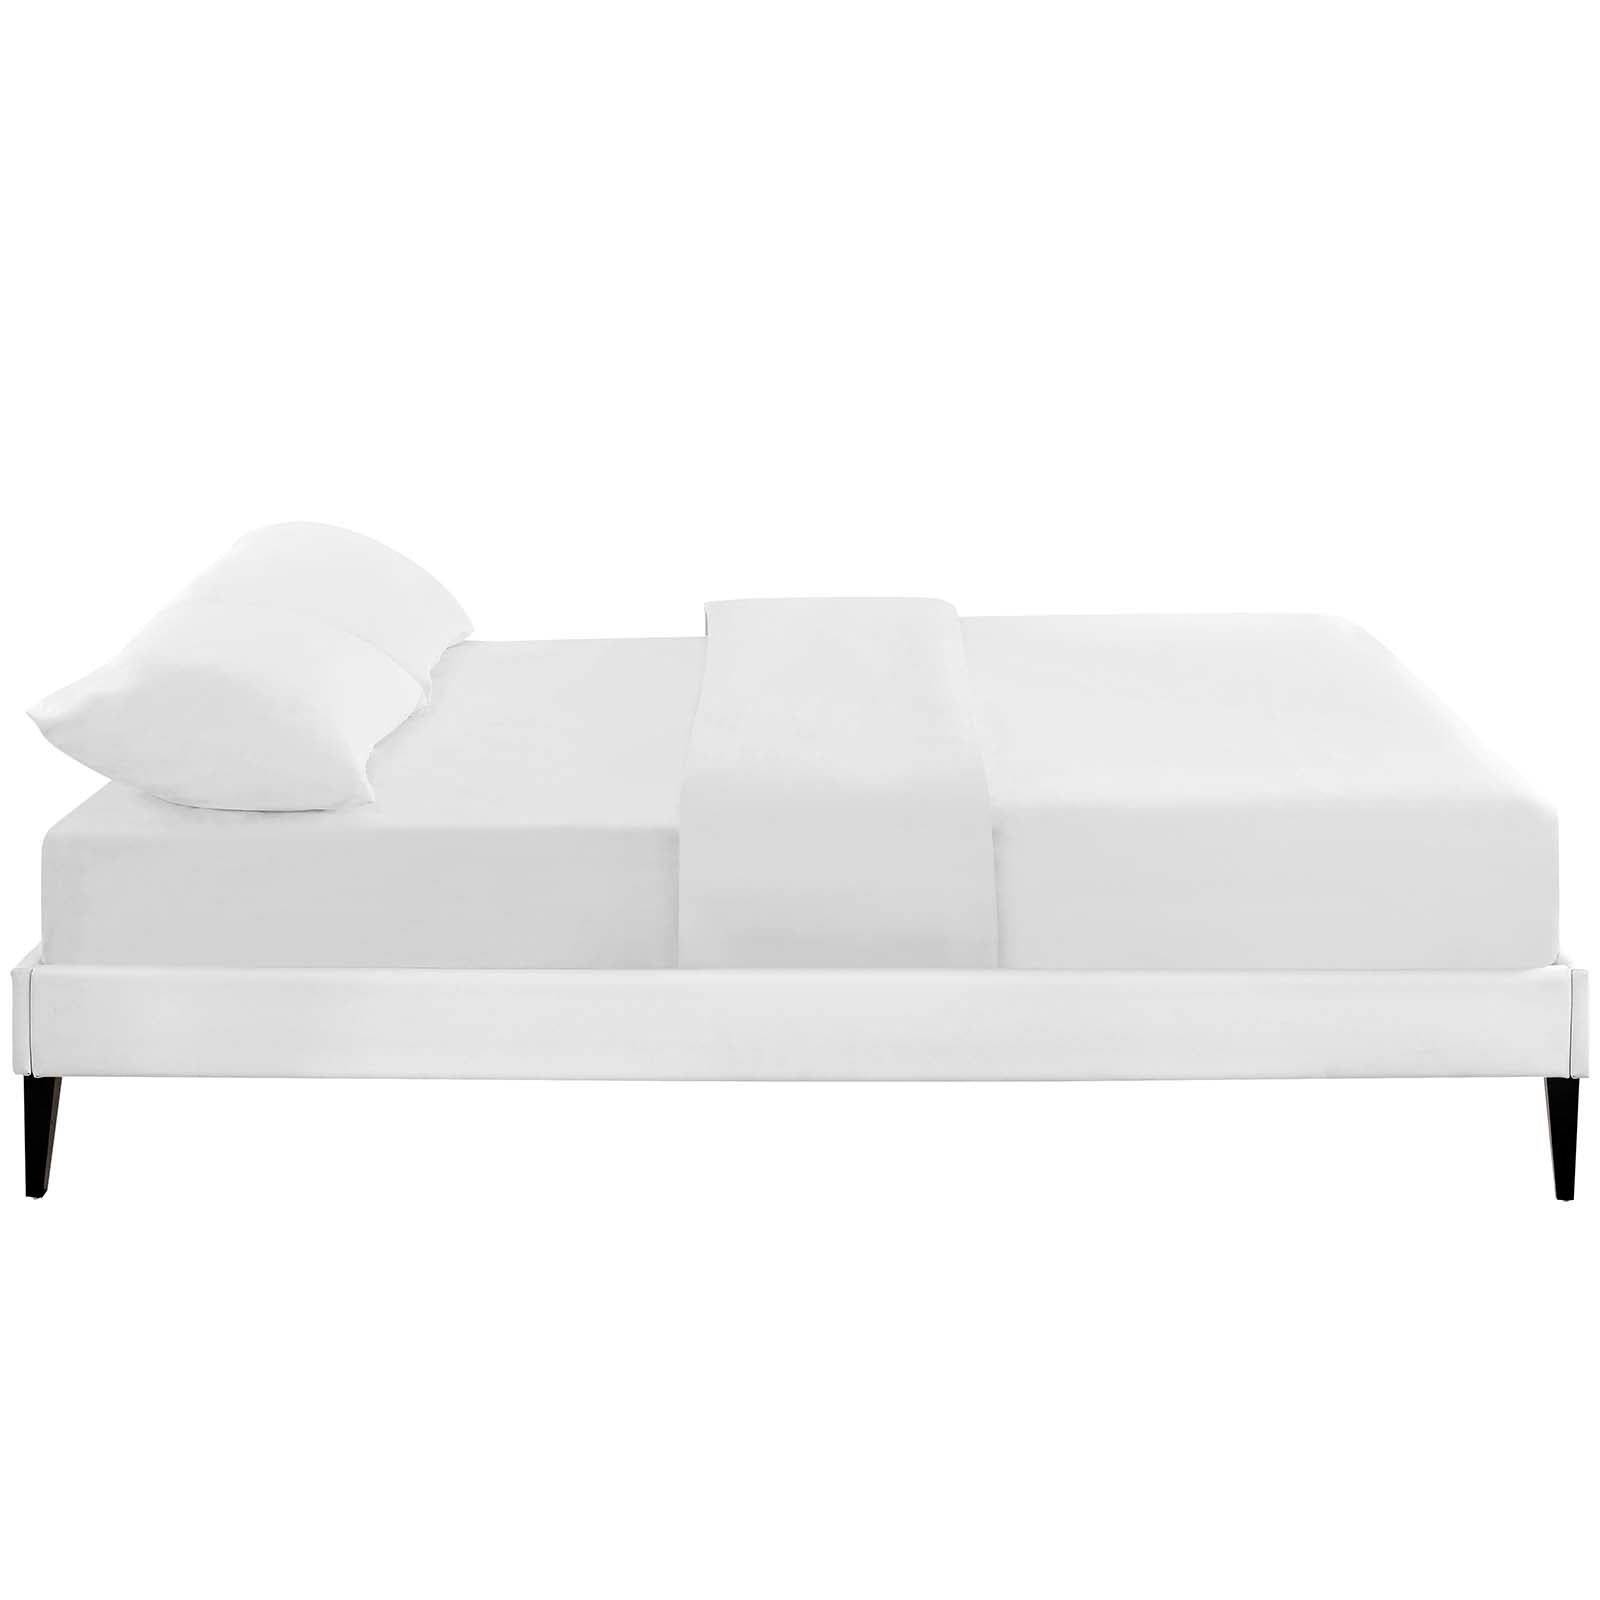 Tessie King Vinyl Bed Frame with Squared Tapered Legs